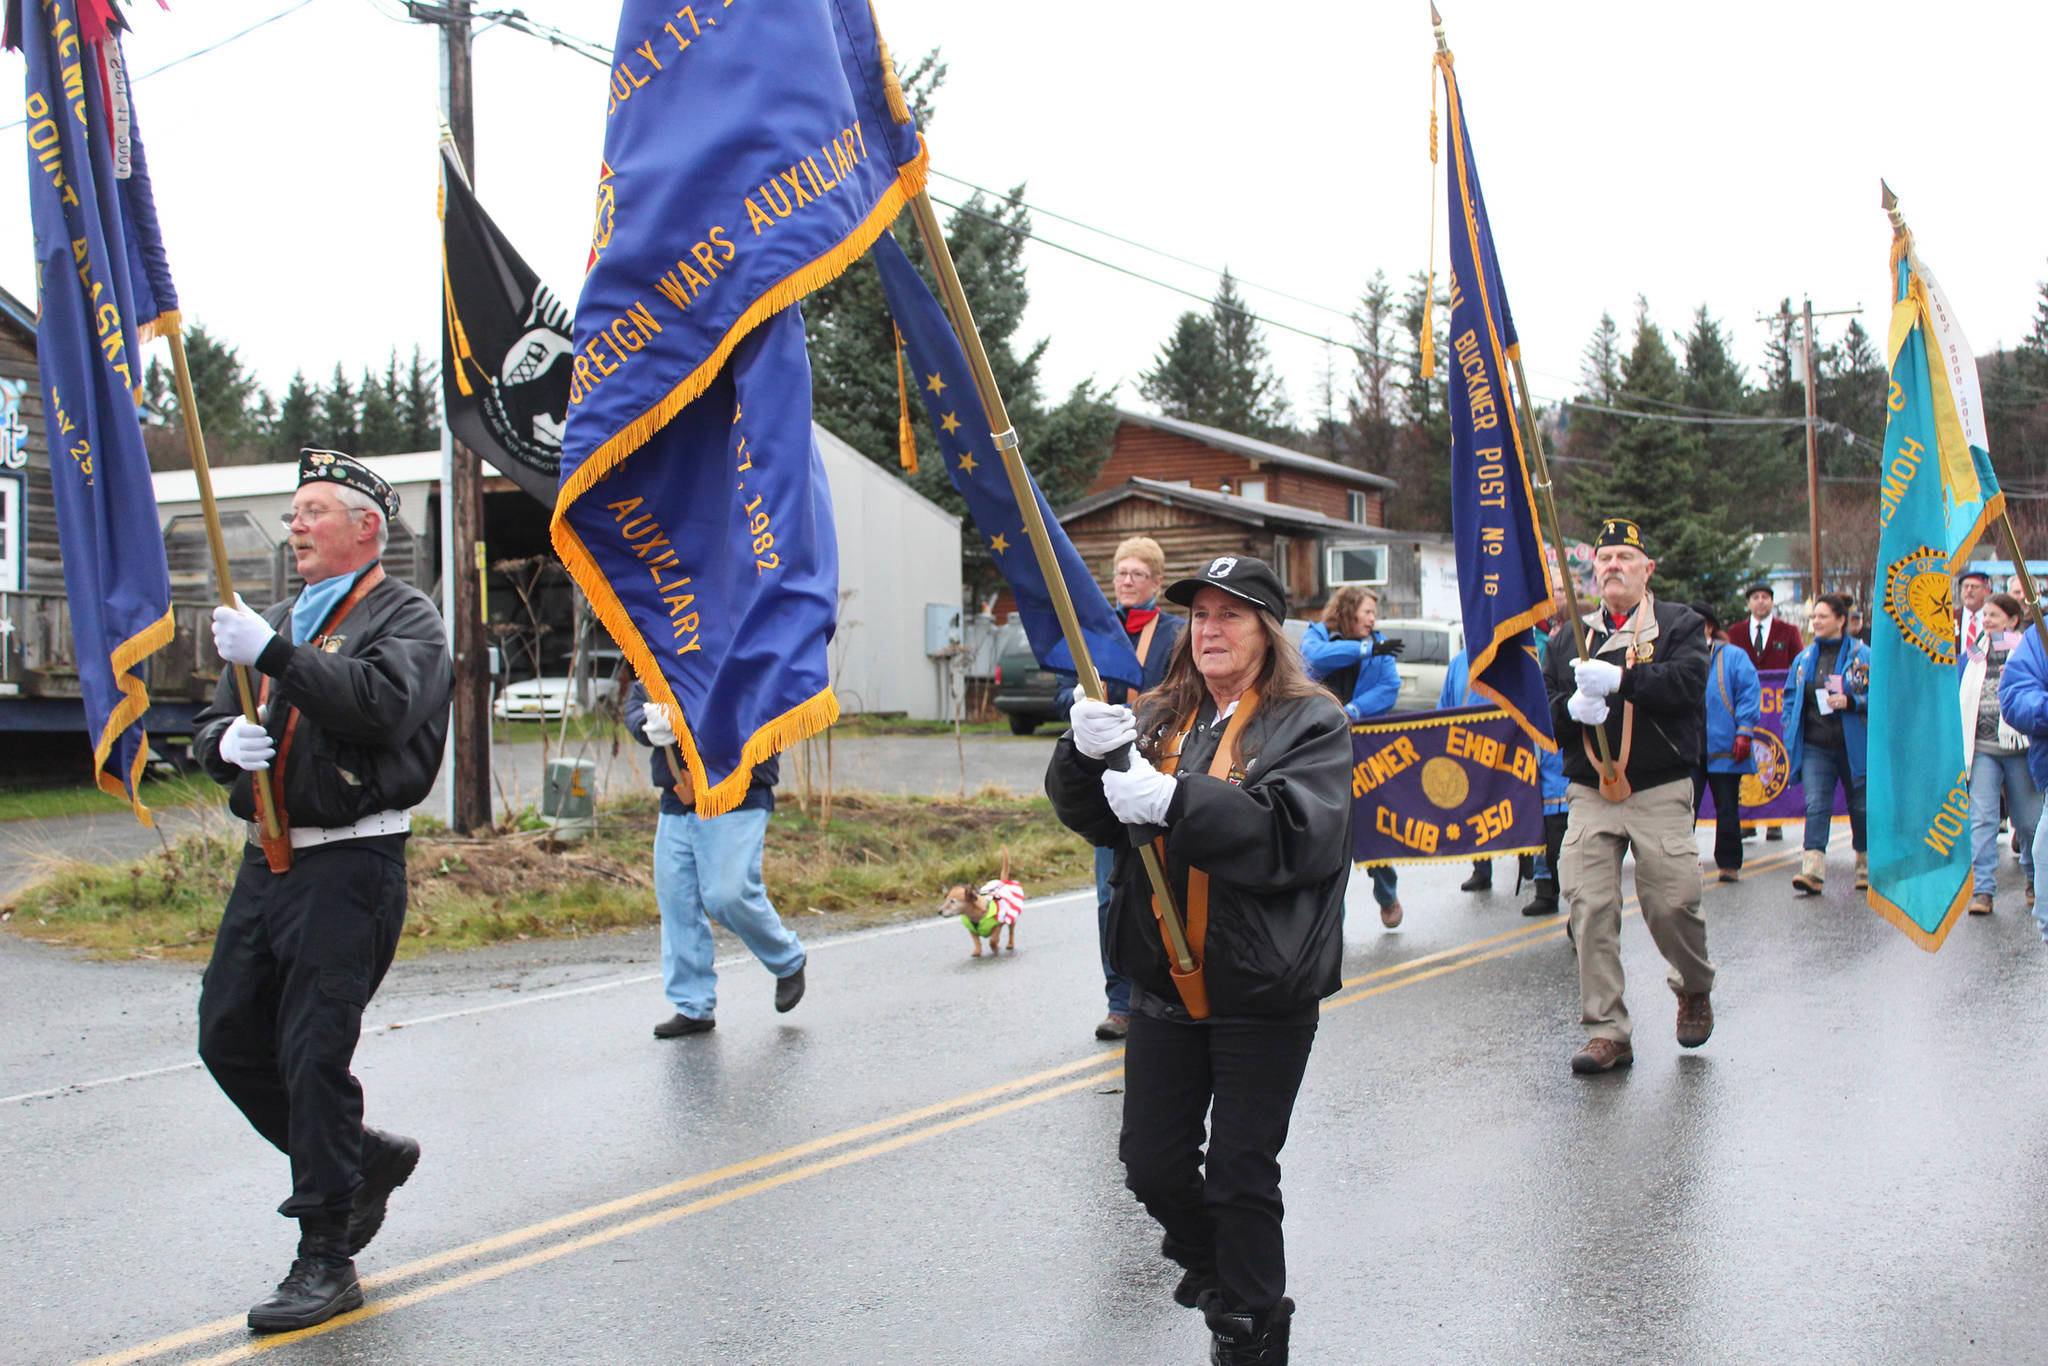 (Photo by Megan Pacer/Homer News) Veterans march down Main Street in a Veterans Day parade Sunday, Nov. 11, 2018 in Homer, Alaska. Veterans Day events start at 11 a.m. Monday, Nov. 11, at the memorial at the corner of Lake Street and Pioneer Avenue. After a parade down Pioneer Avenue and ending on the Sterling Highway, a second ceremony will be held at the Veterans Memorial at the Alaska Islands and Ocean Visitor Center.